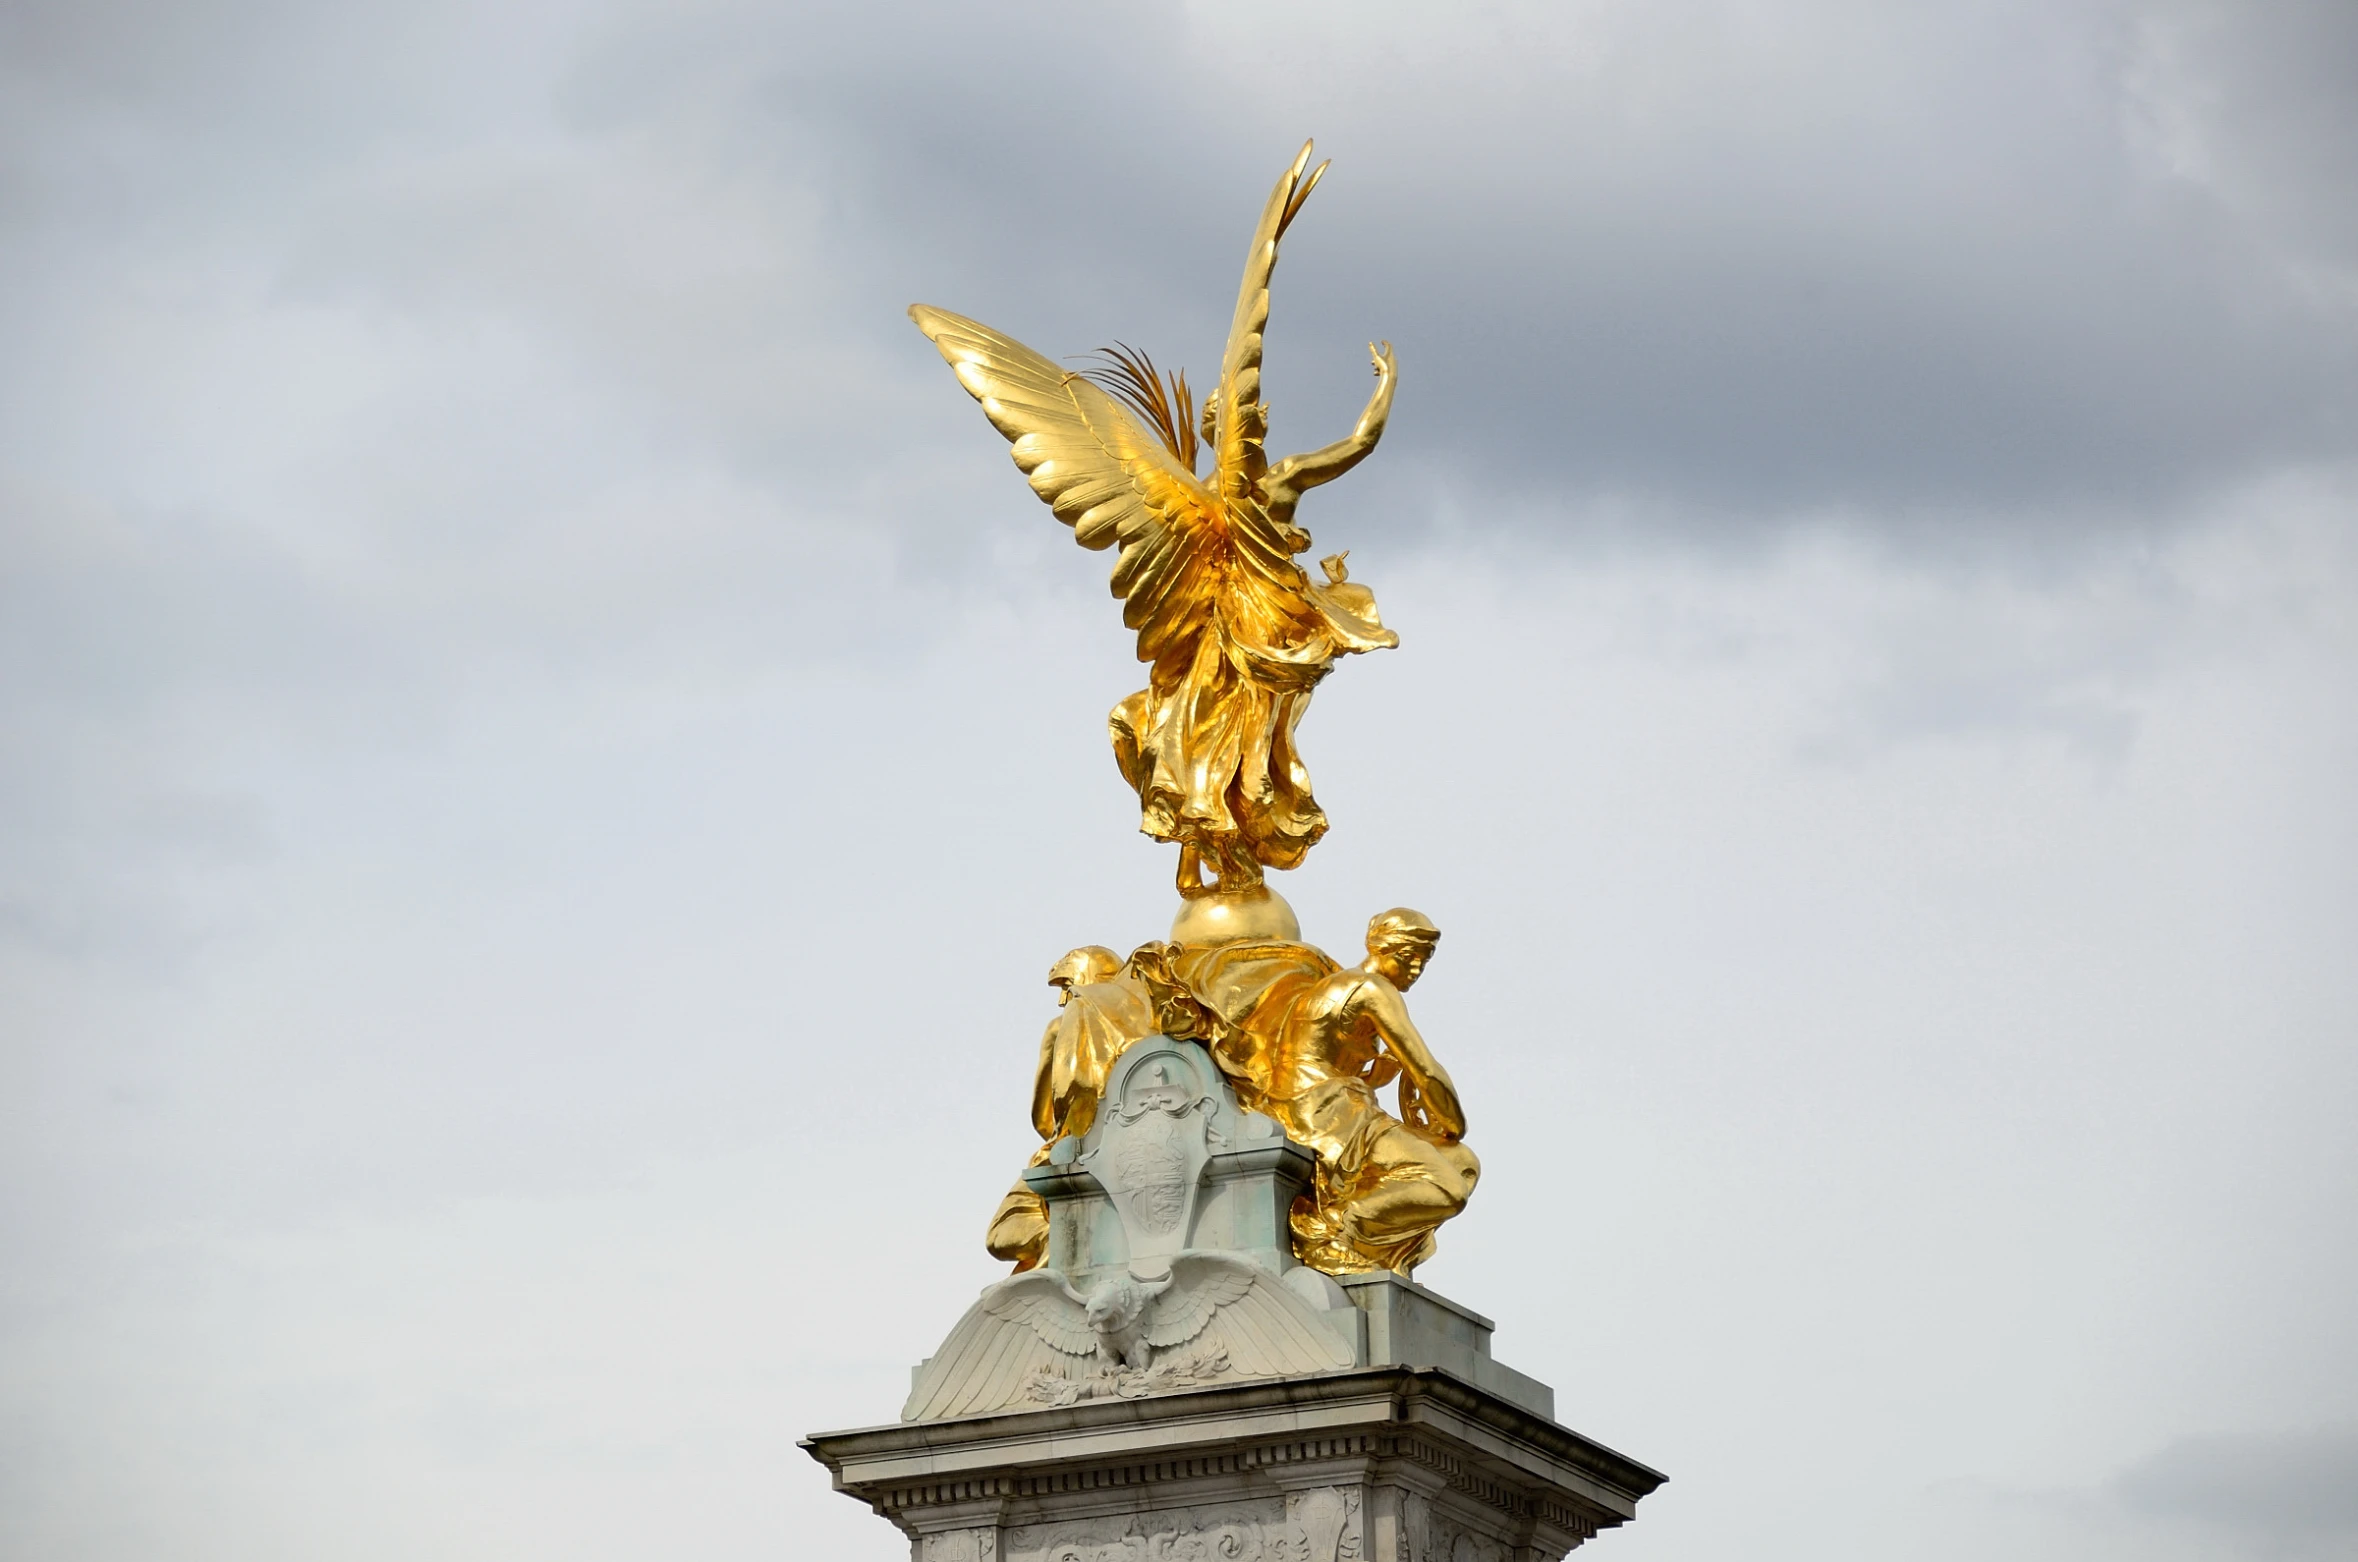 golden statue with two angels standing on top of it